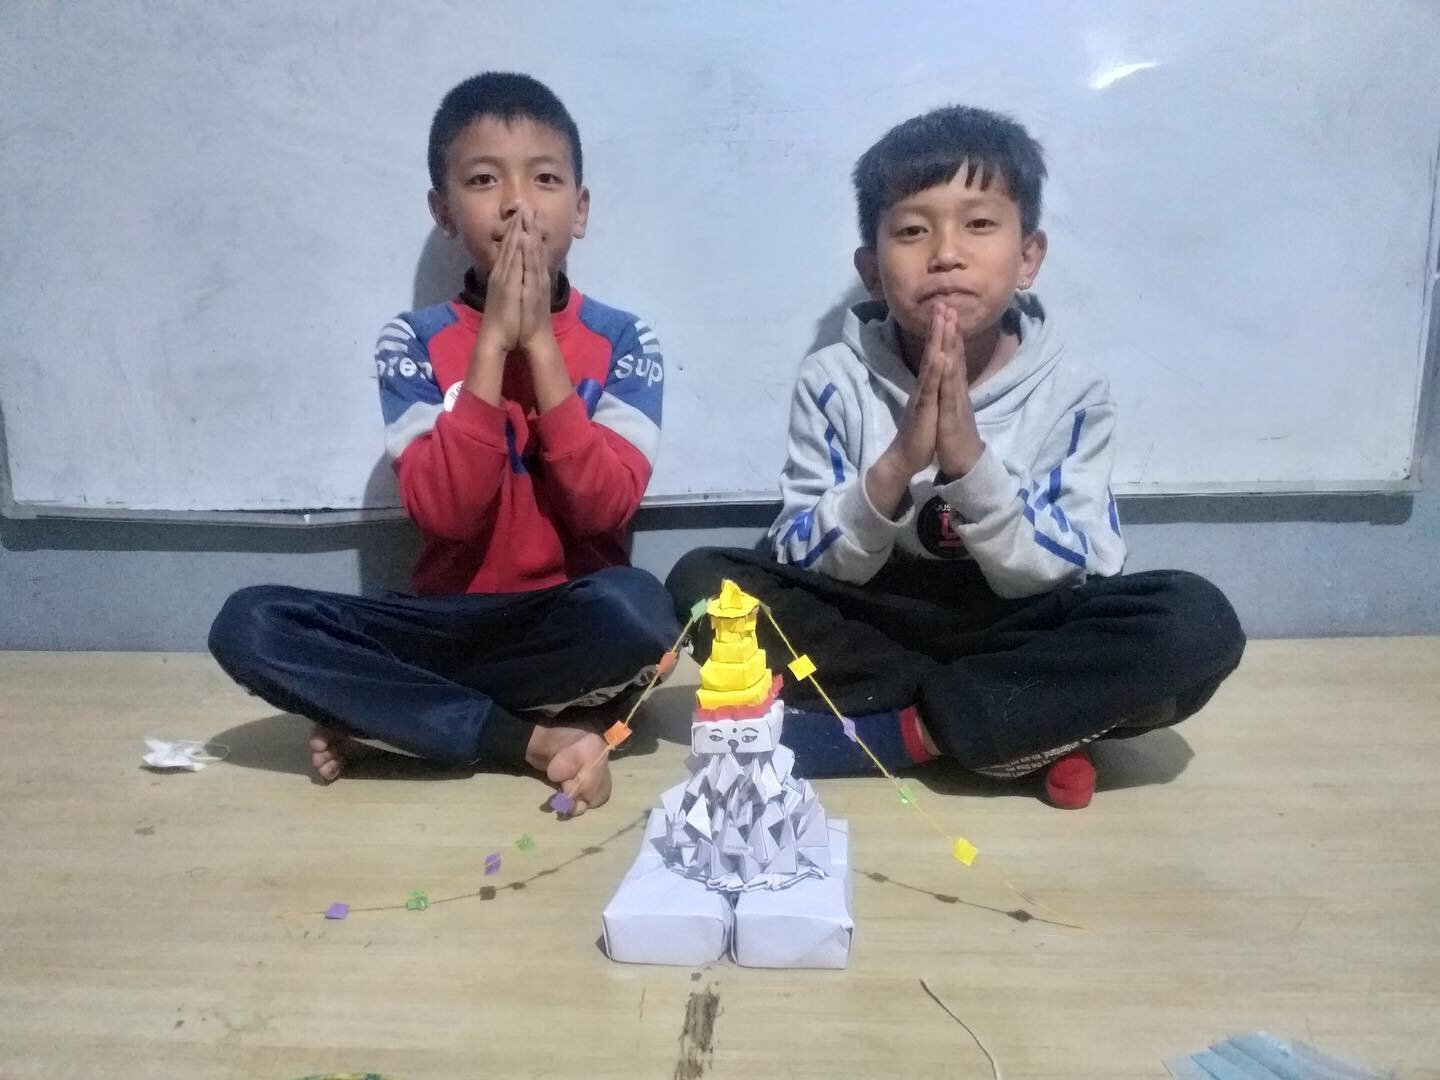 As Nepal just celebrated Buddha Jayanti, it is fitting that students studied and recreated the Bouddha Stupa!

Boudhanath Stupa is a gateway to heaven, providing a horizon between the earth and sky. The base of the stupa has three large platforms, ea